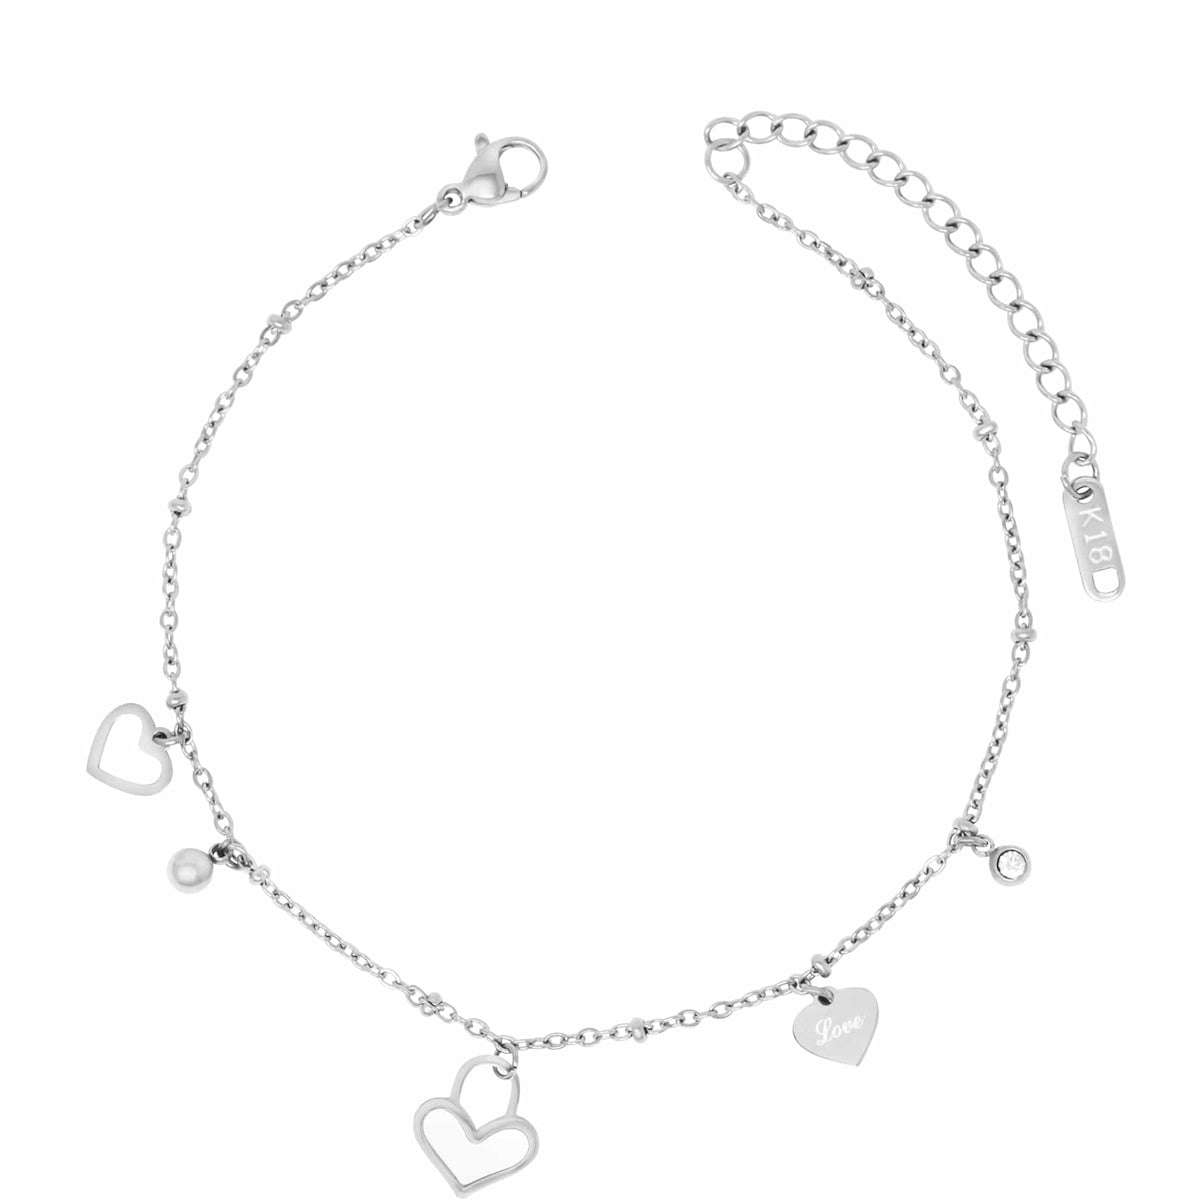 BohoMoon Stainless Steel Brandy Anklet Silver